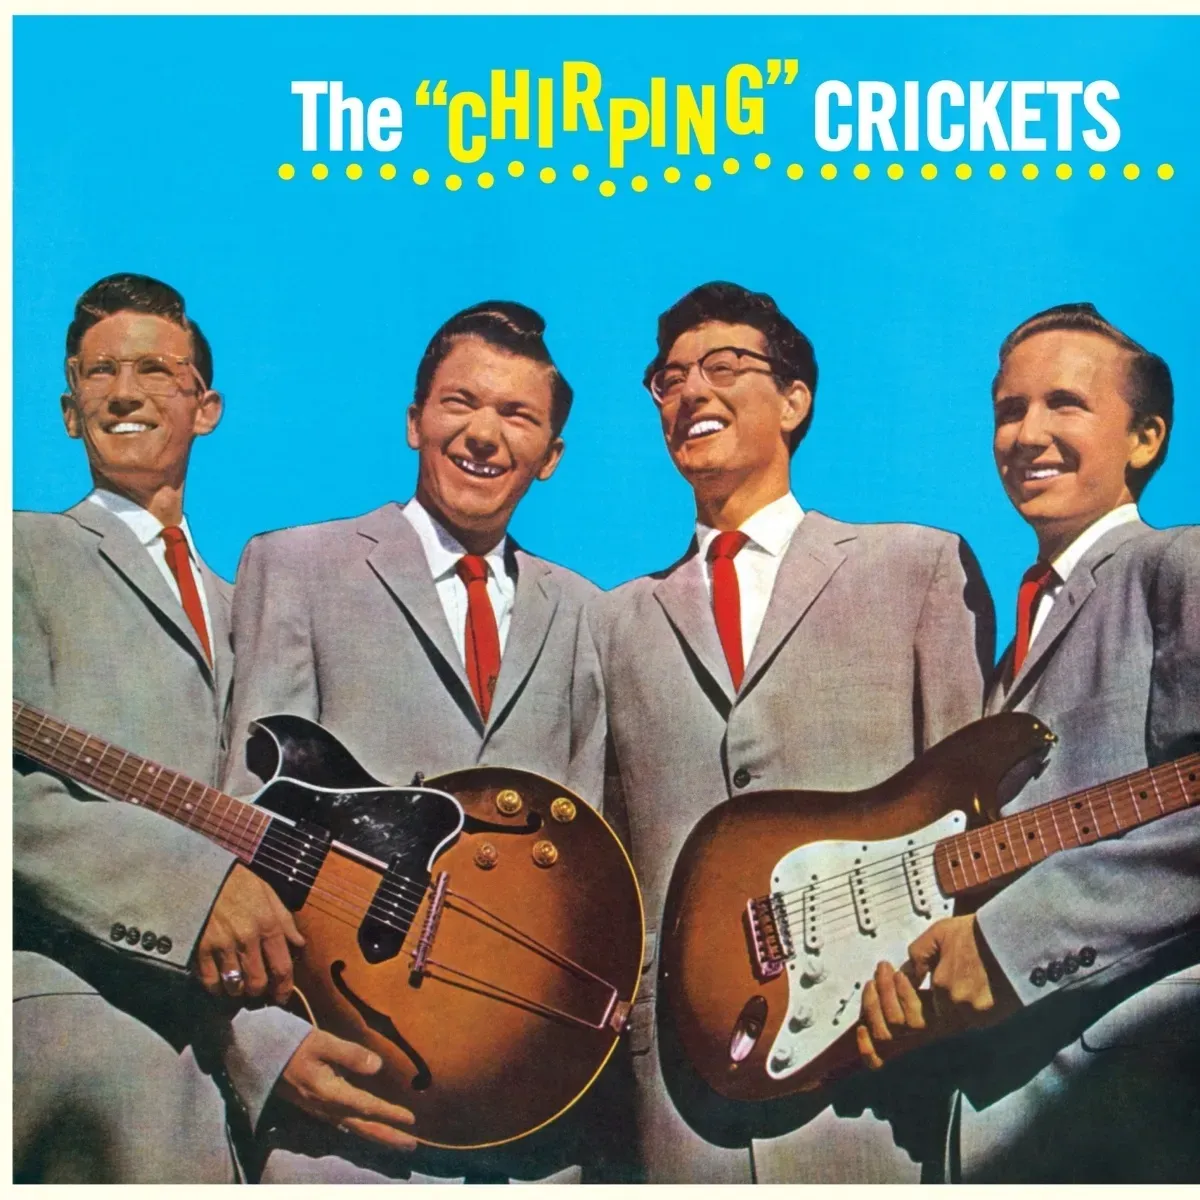 The Chirping Crickets (Vinyl) - Buddy Holly & The Crickets. (LP)